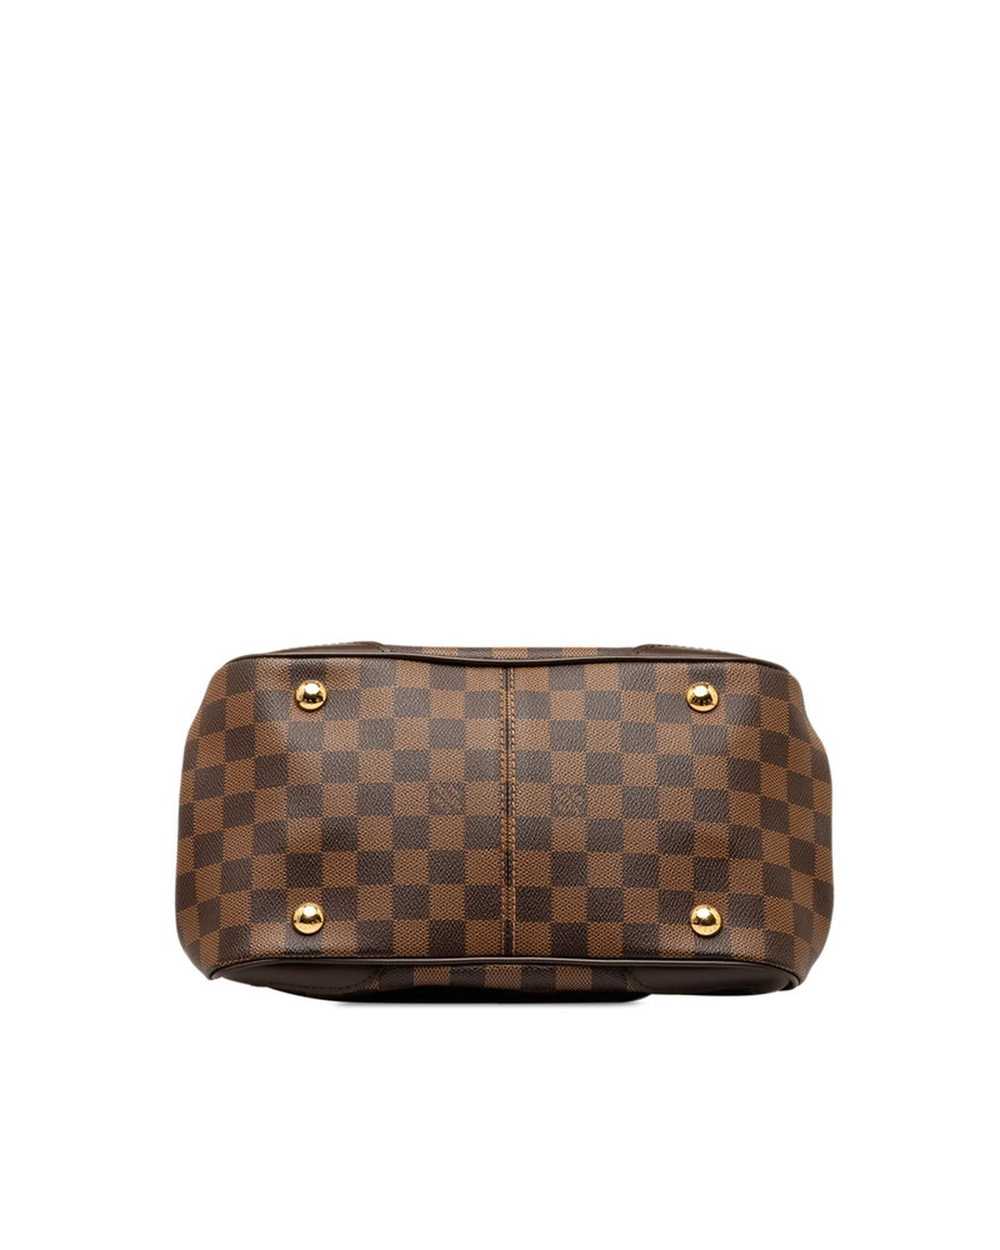 Louis Vuitton Brown Leather Verona PM Bag in Exce… - image 4